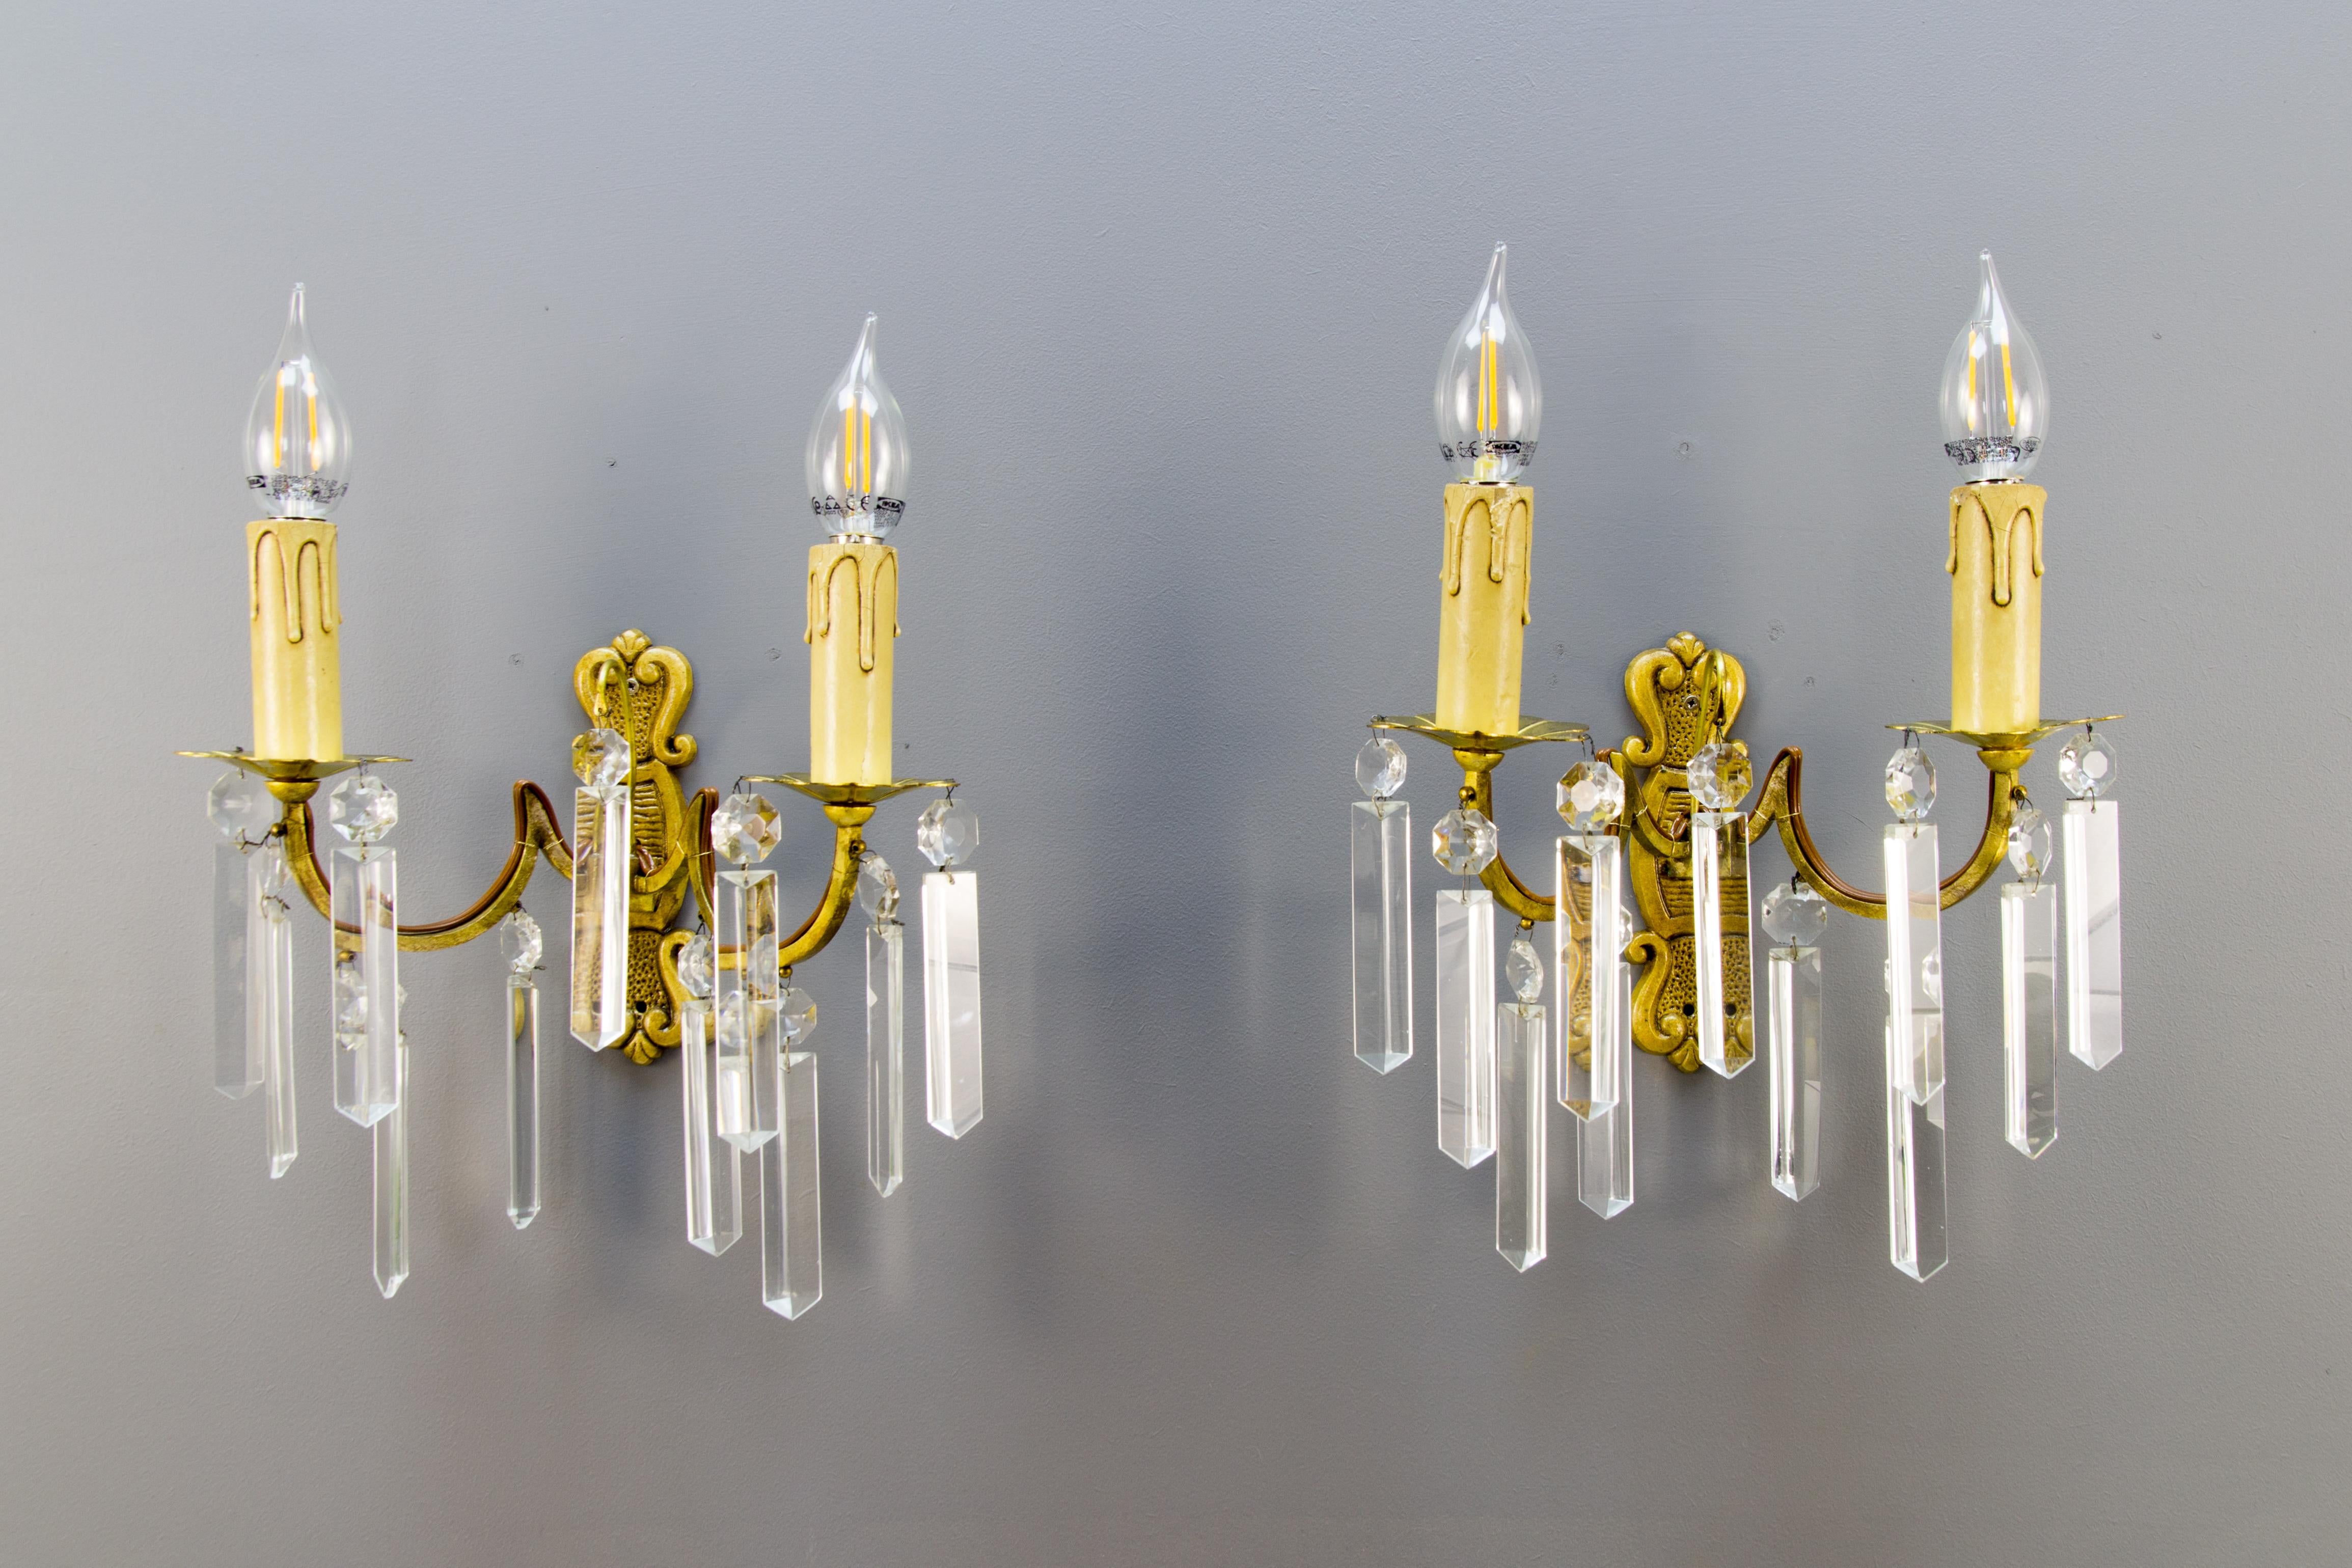 Pair of French bronze and crystal glass twin arm wall sconces, ca. 1930
A beautiful pair of bronze ornate wall sconces hung with crystal prisms. Each sconce has two arms, each with one socket for the E14 size light bulb, France, the first half of